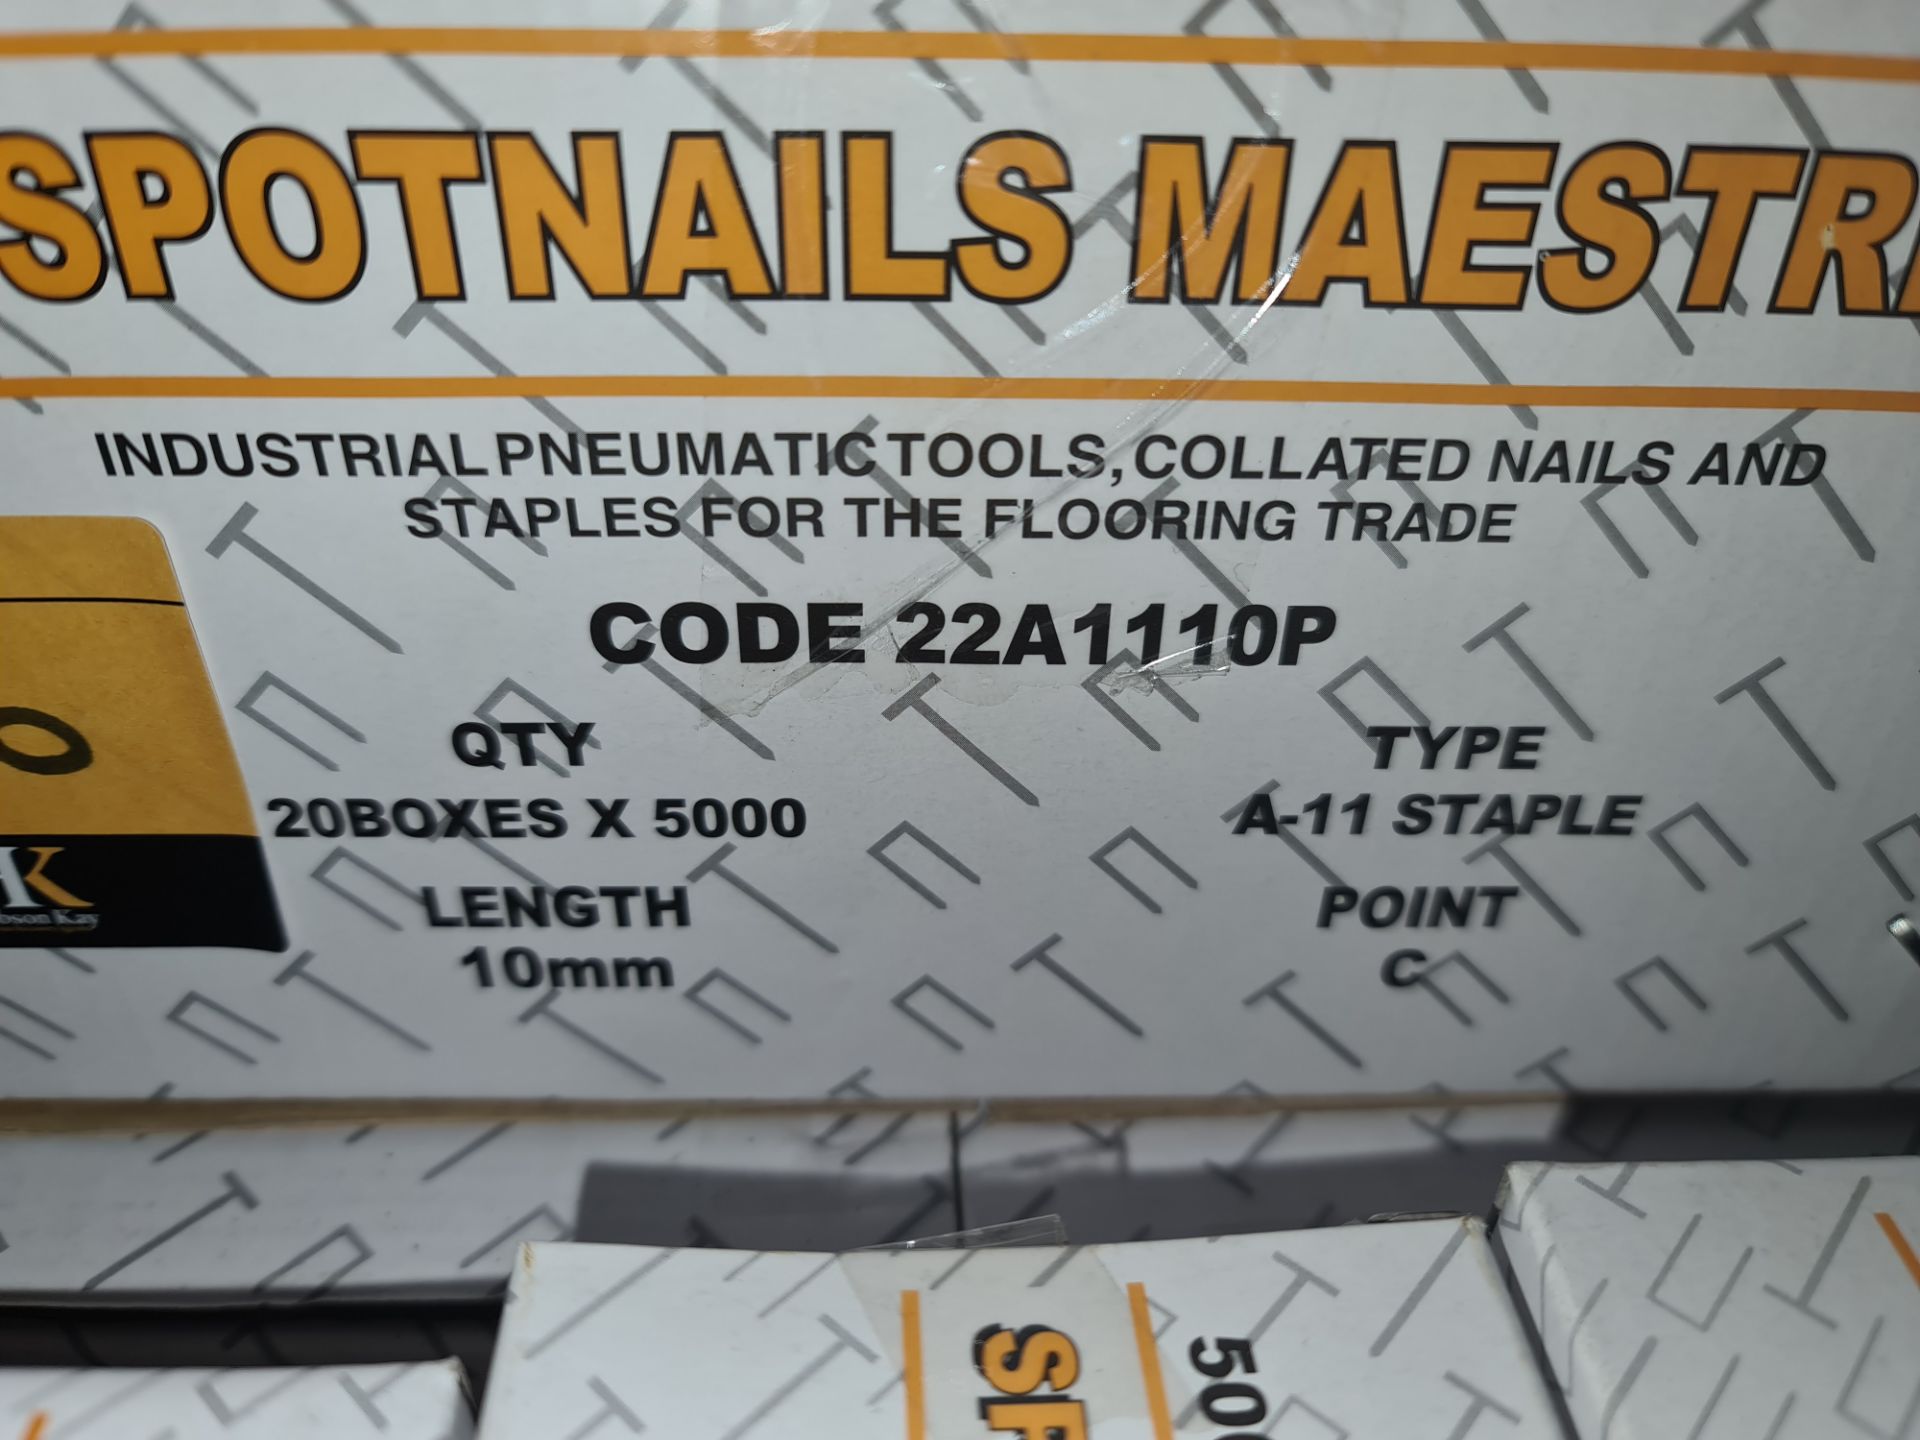 20 boxes of Maestri Spotnails, each box containing 5,000 type A-11.C 10mm staples. Product code - Image 3 of 4